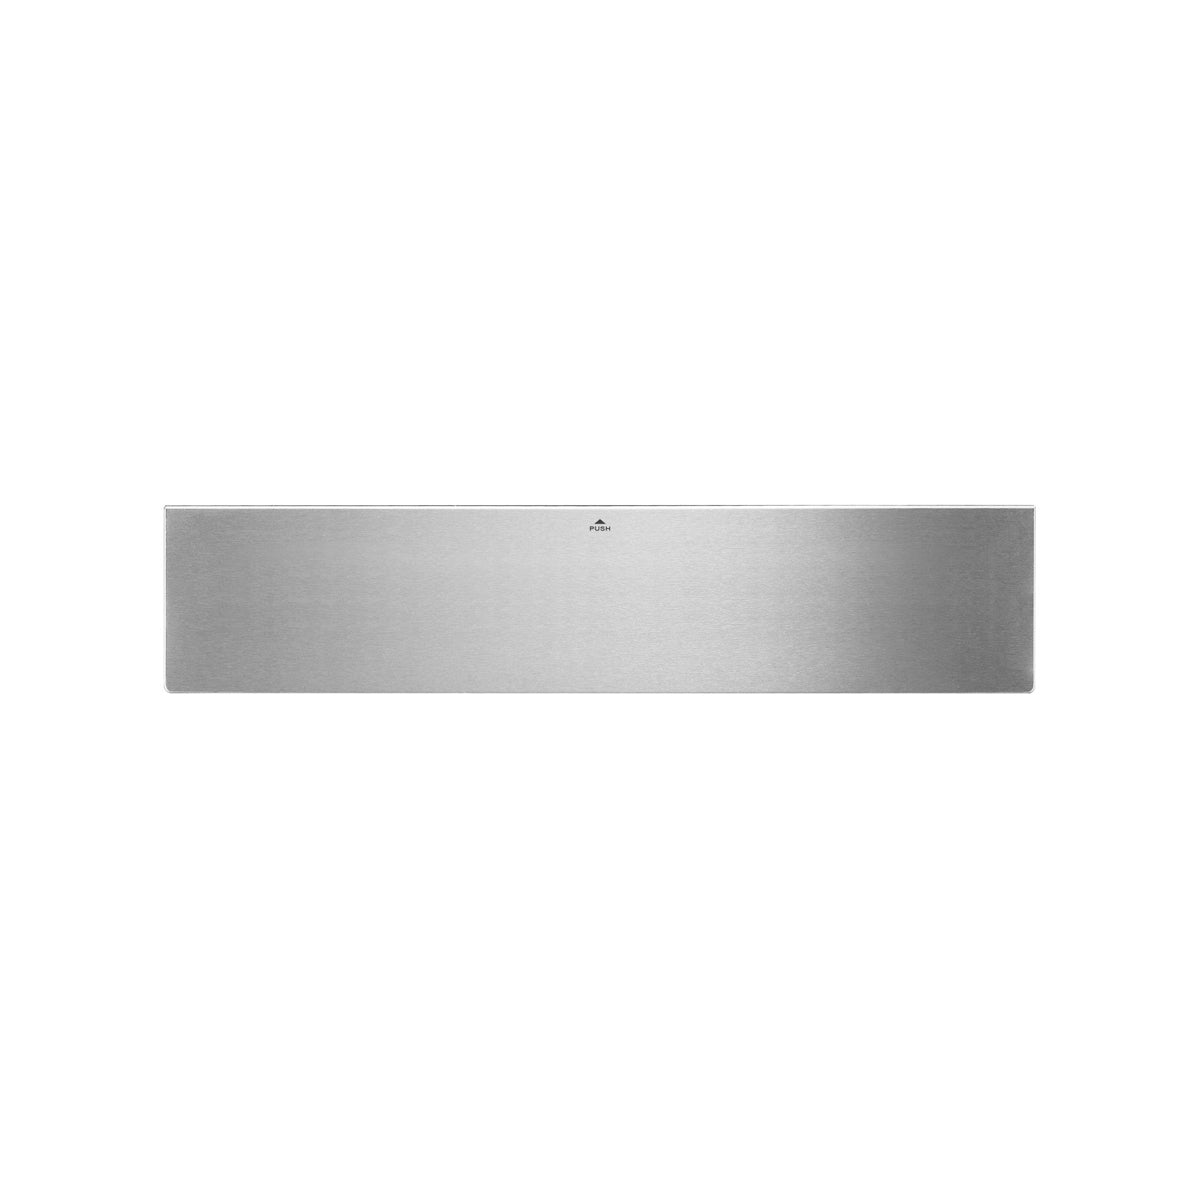 Midea 22L Stainless Steel Warming Drawer (Silver)